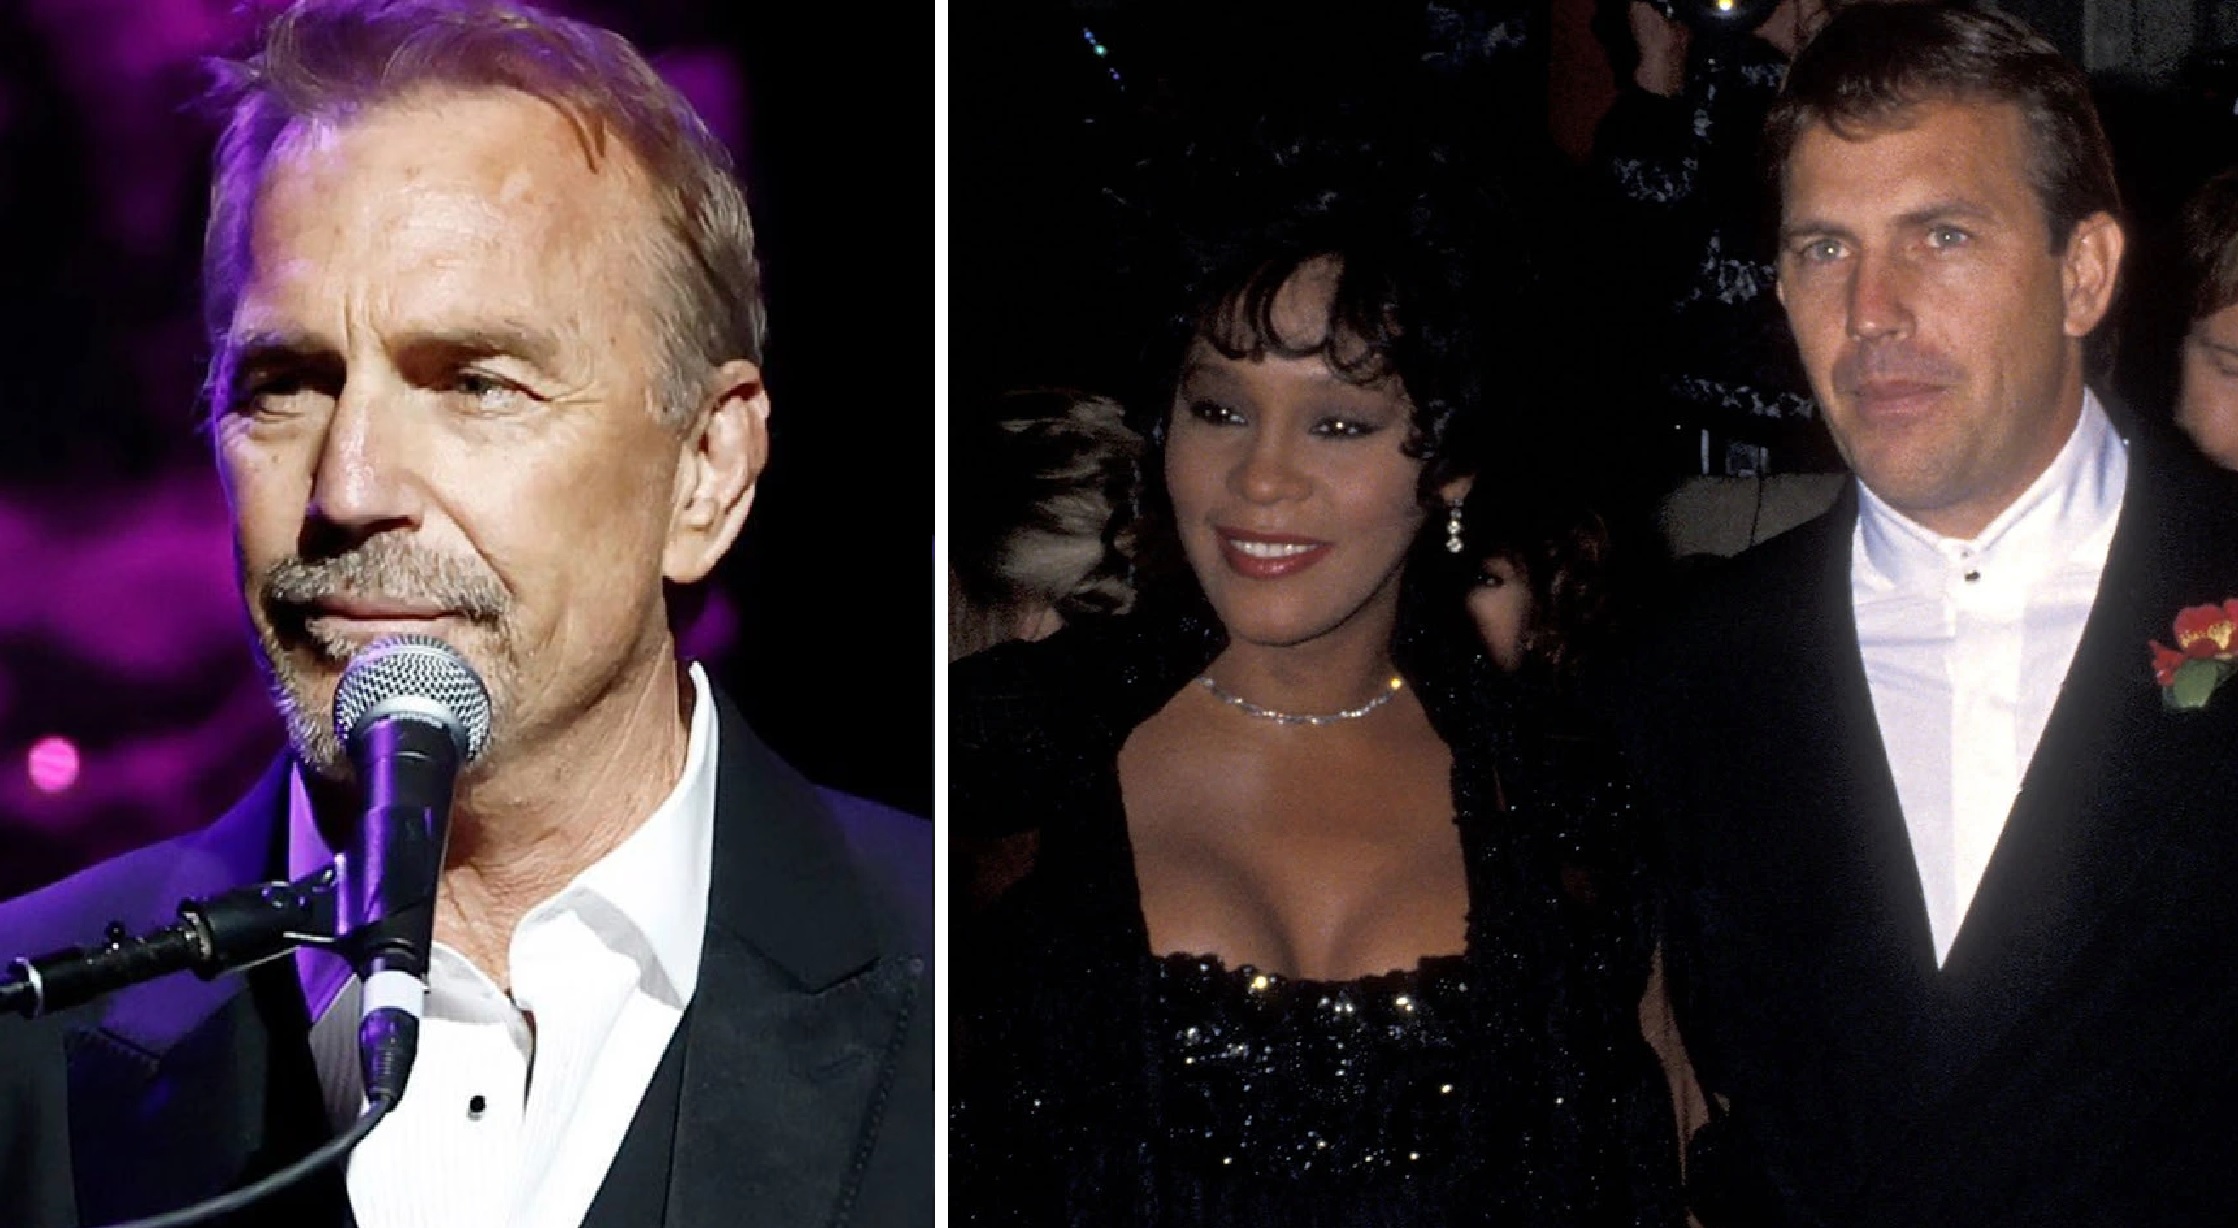 Kevin Costner Remembers Whitney Houston At Pre-Grammy Party, “We could not protect our beloved”